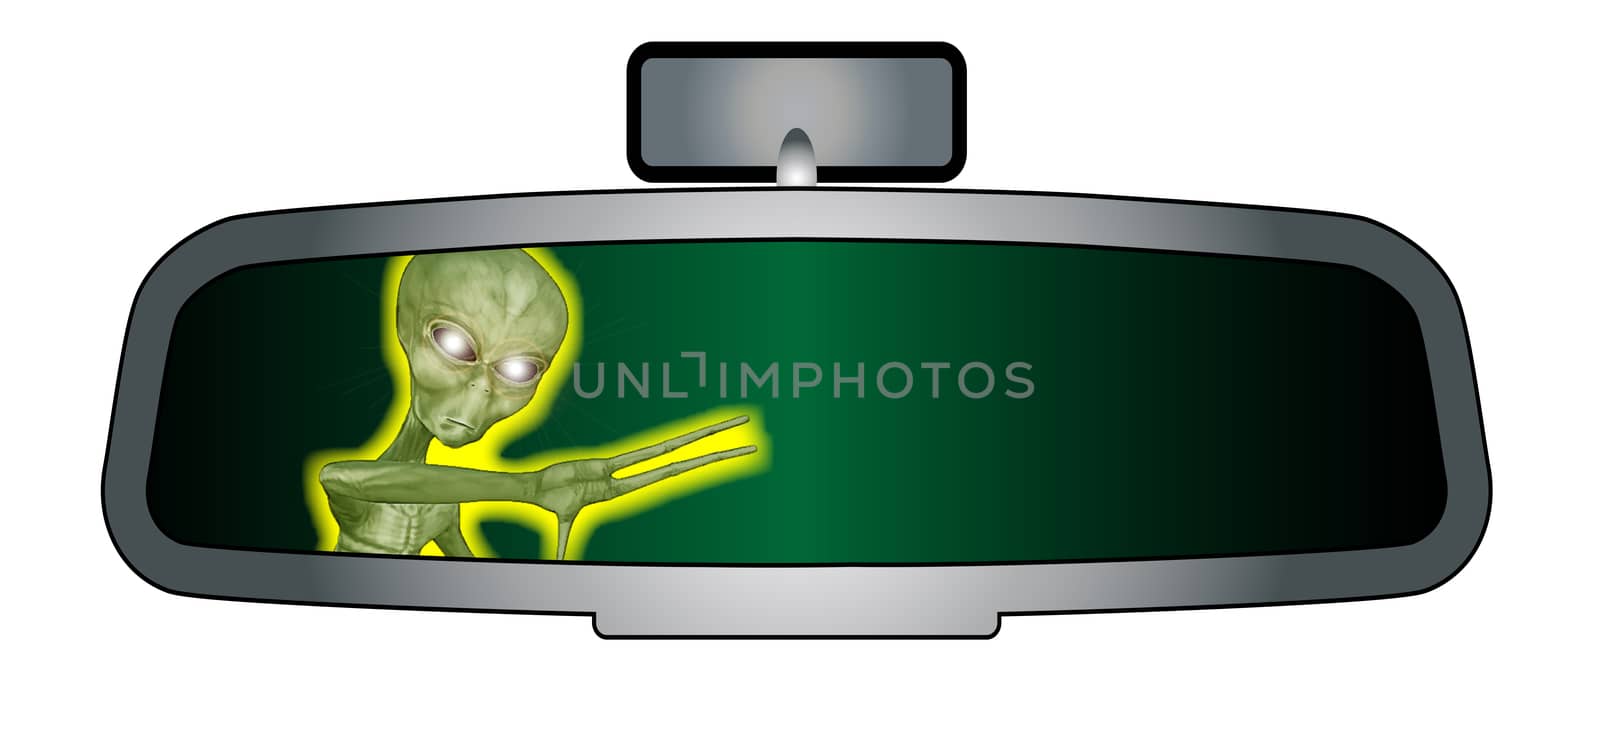 Depiction of a vehicle rear view mirror with an alien beast